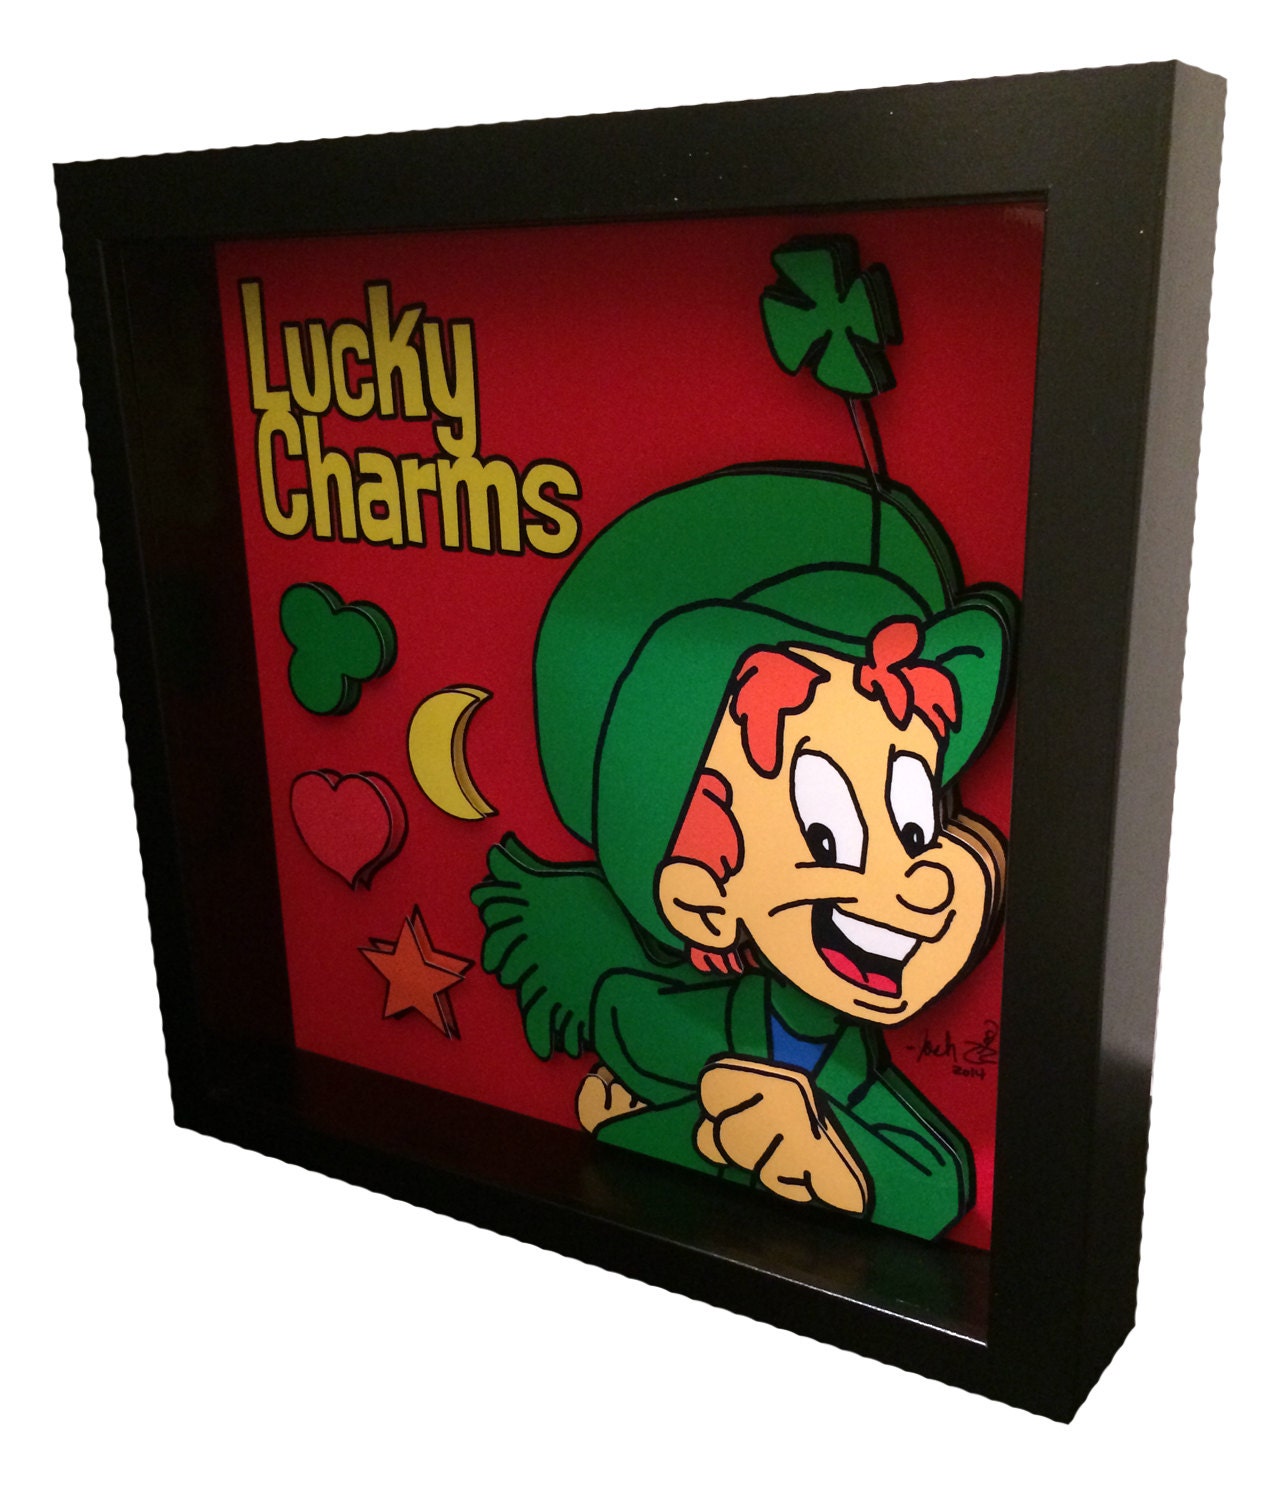 Funny lucky charms meme